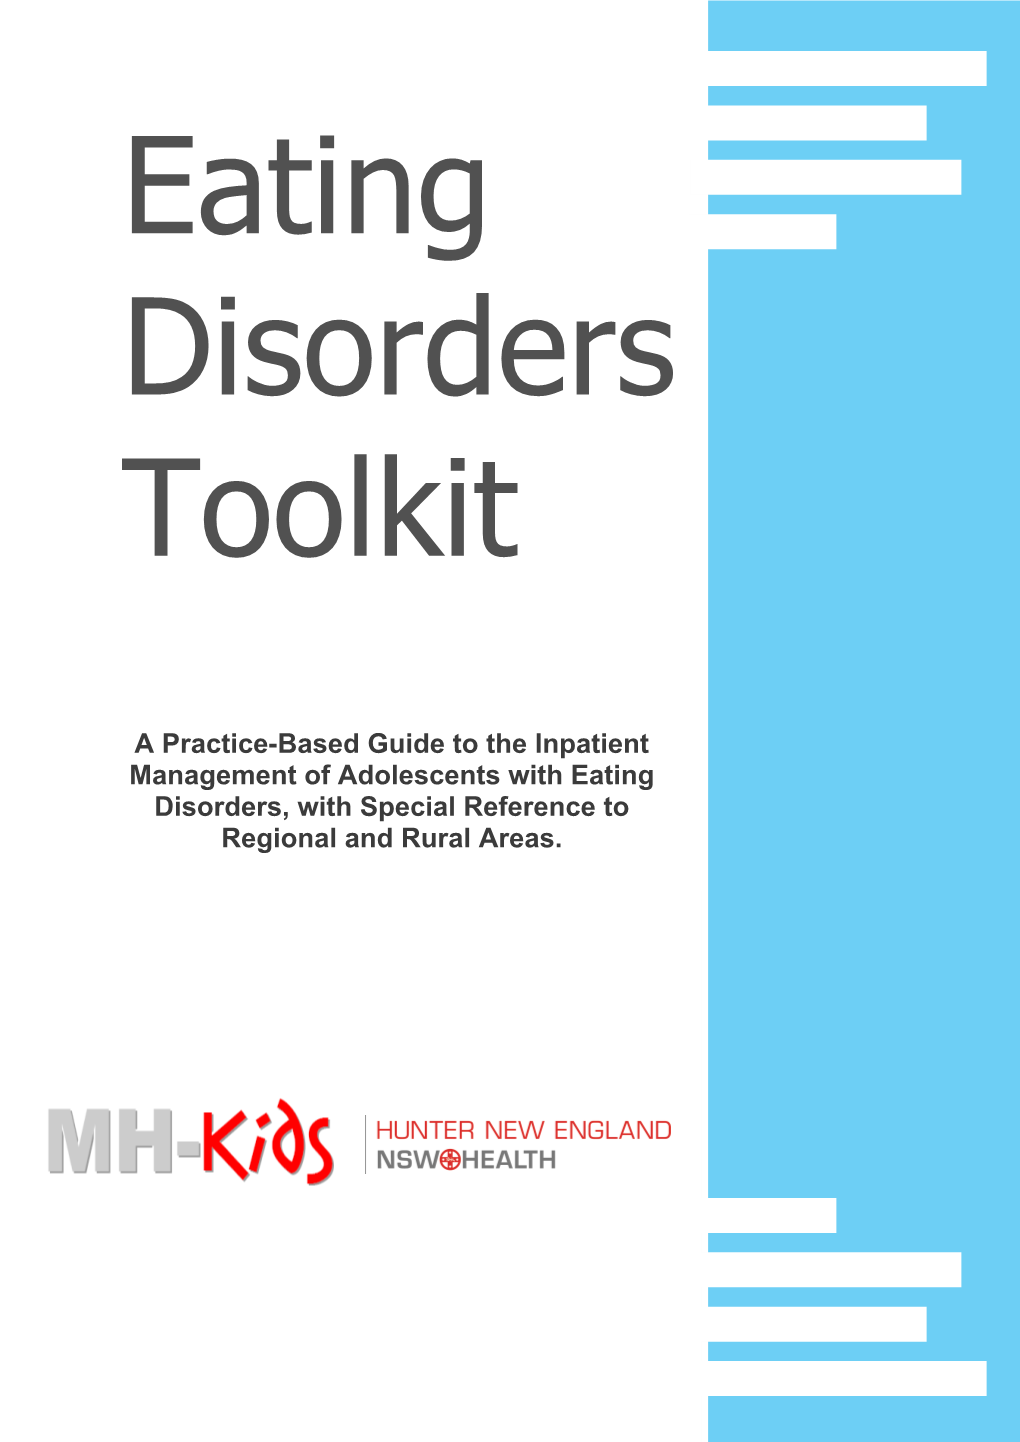 A Practice-Based Guide to the Inpatient Management of Adolescents with Eating Disorders, with Special Reference to Regional and Rural Areas